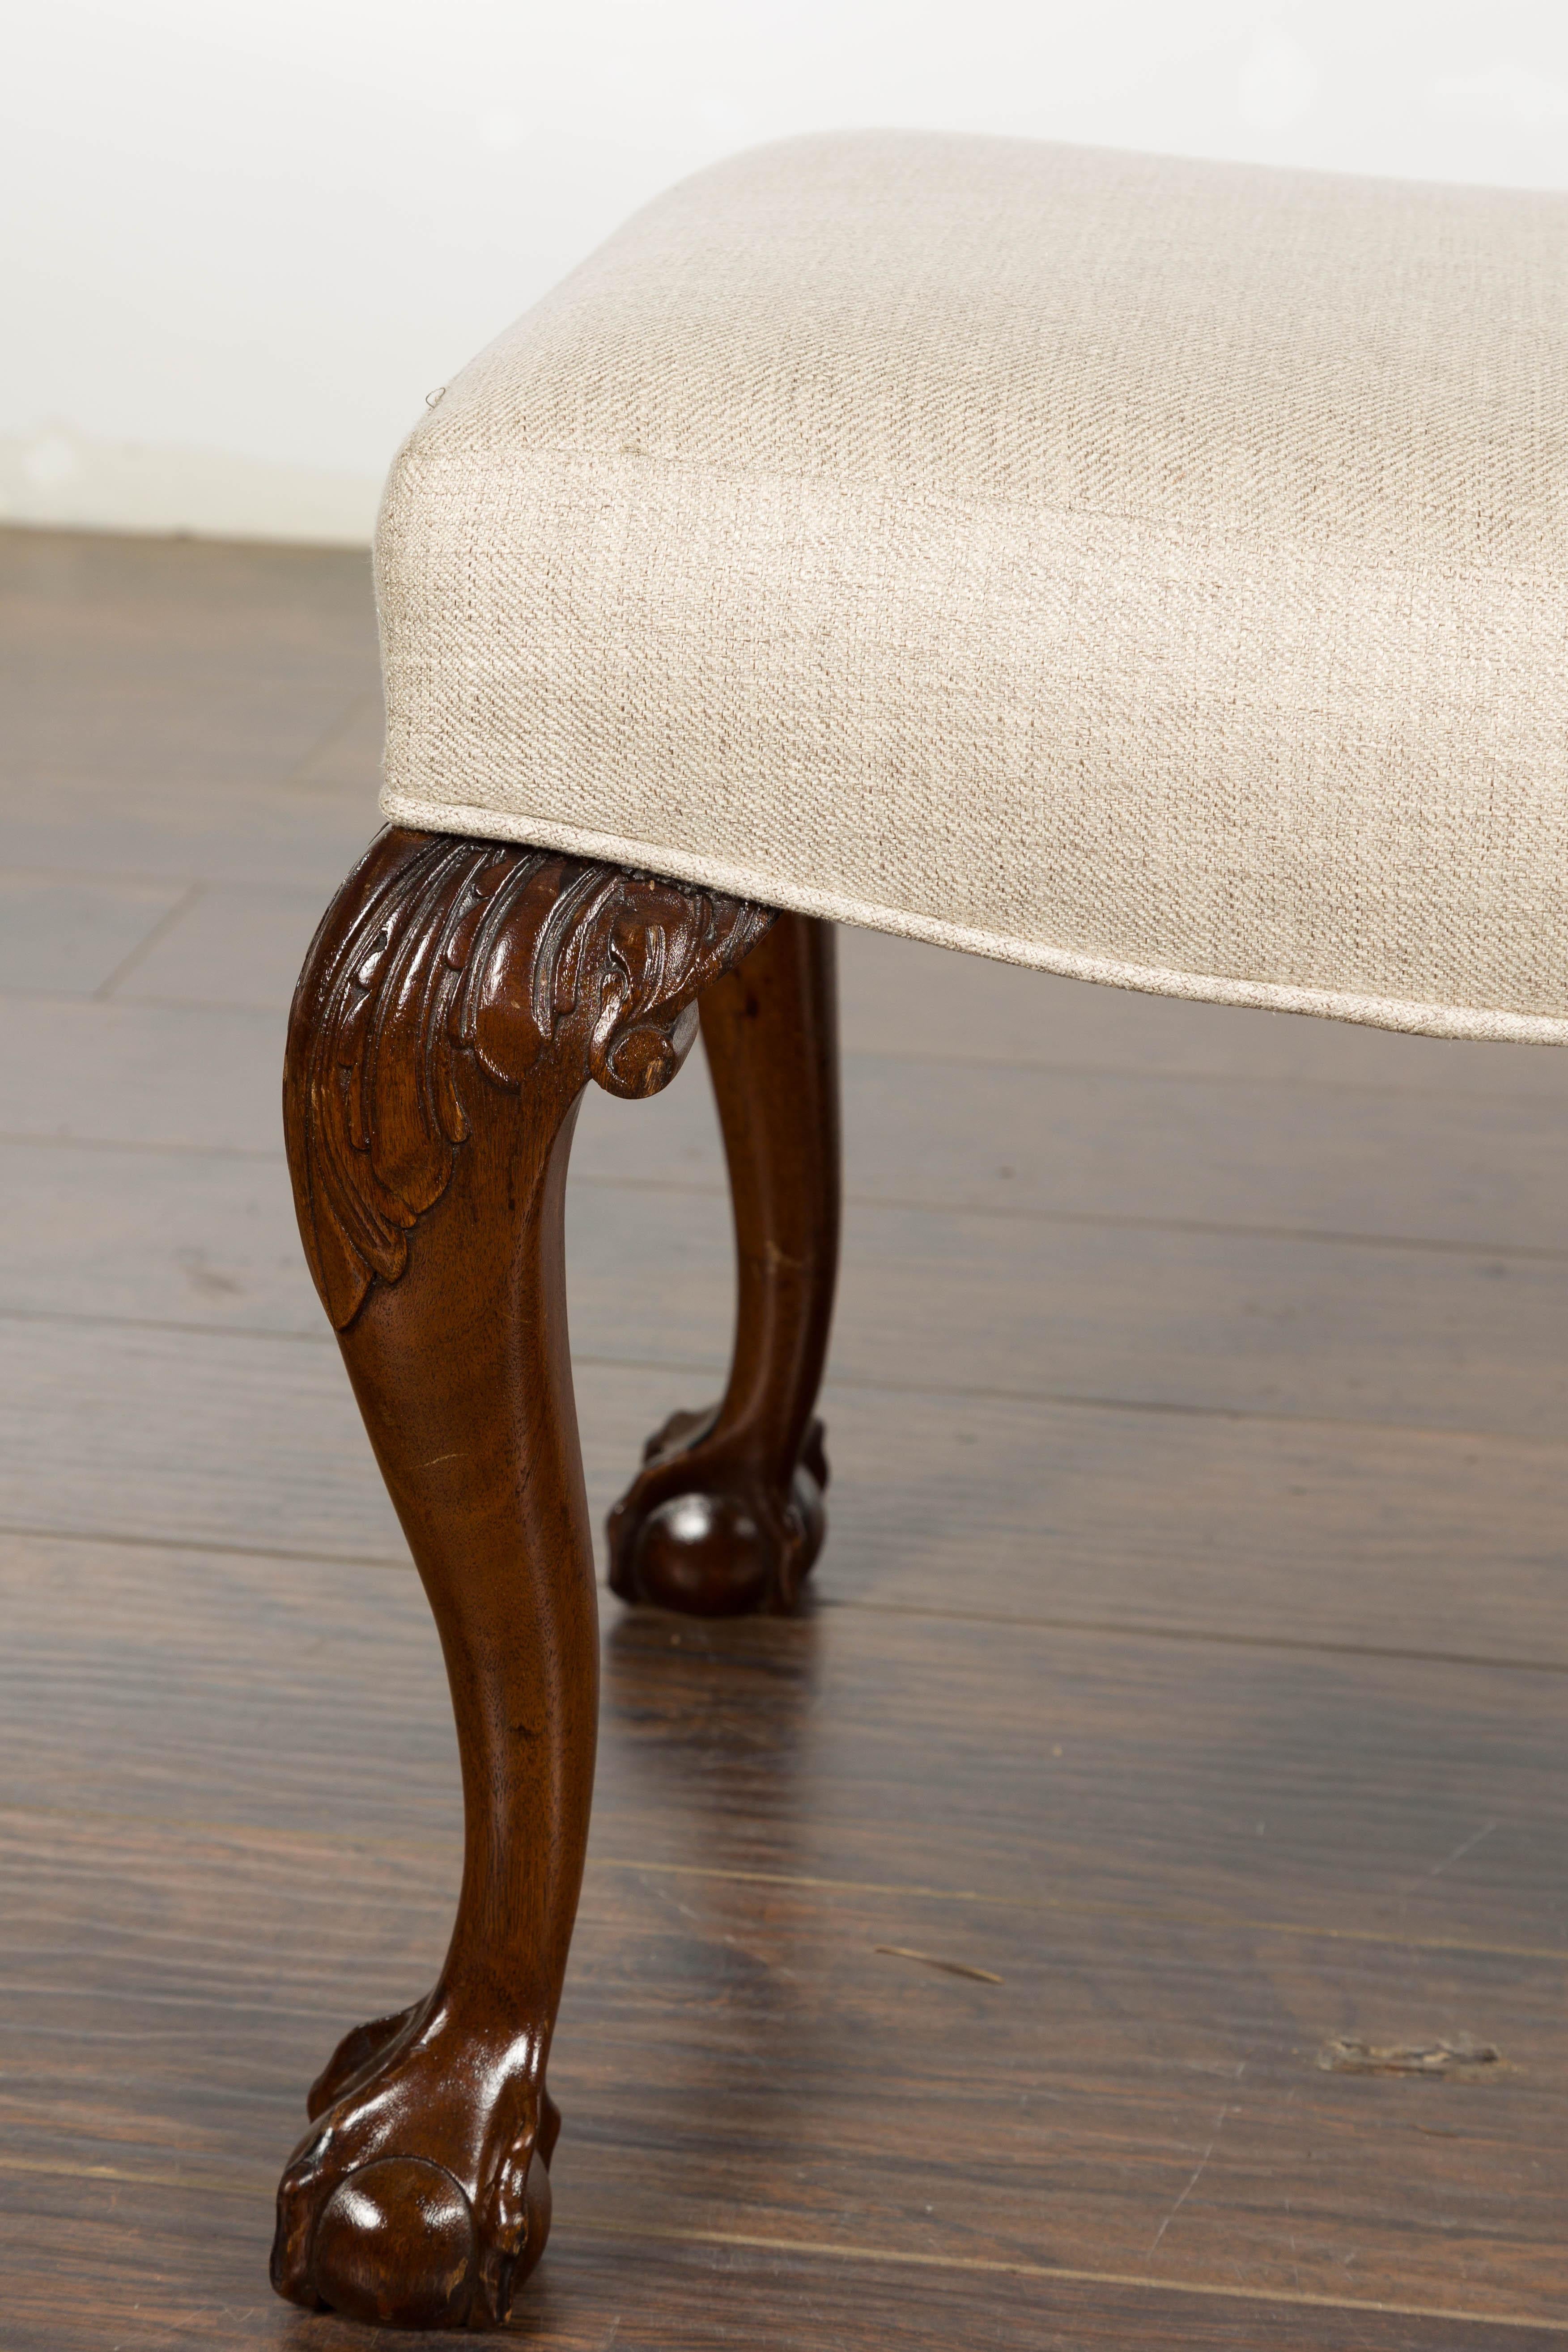 19th Century English Mahogany Upholstered Stool with Cabriole Legs For Sale 4